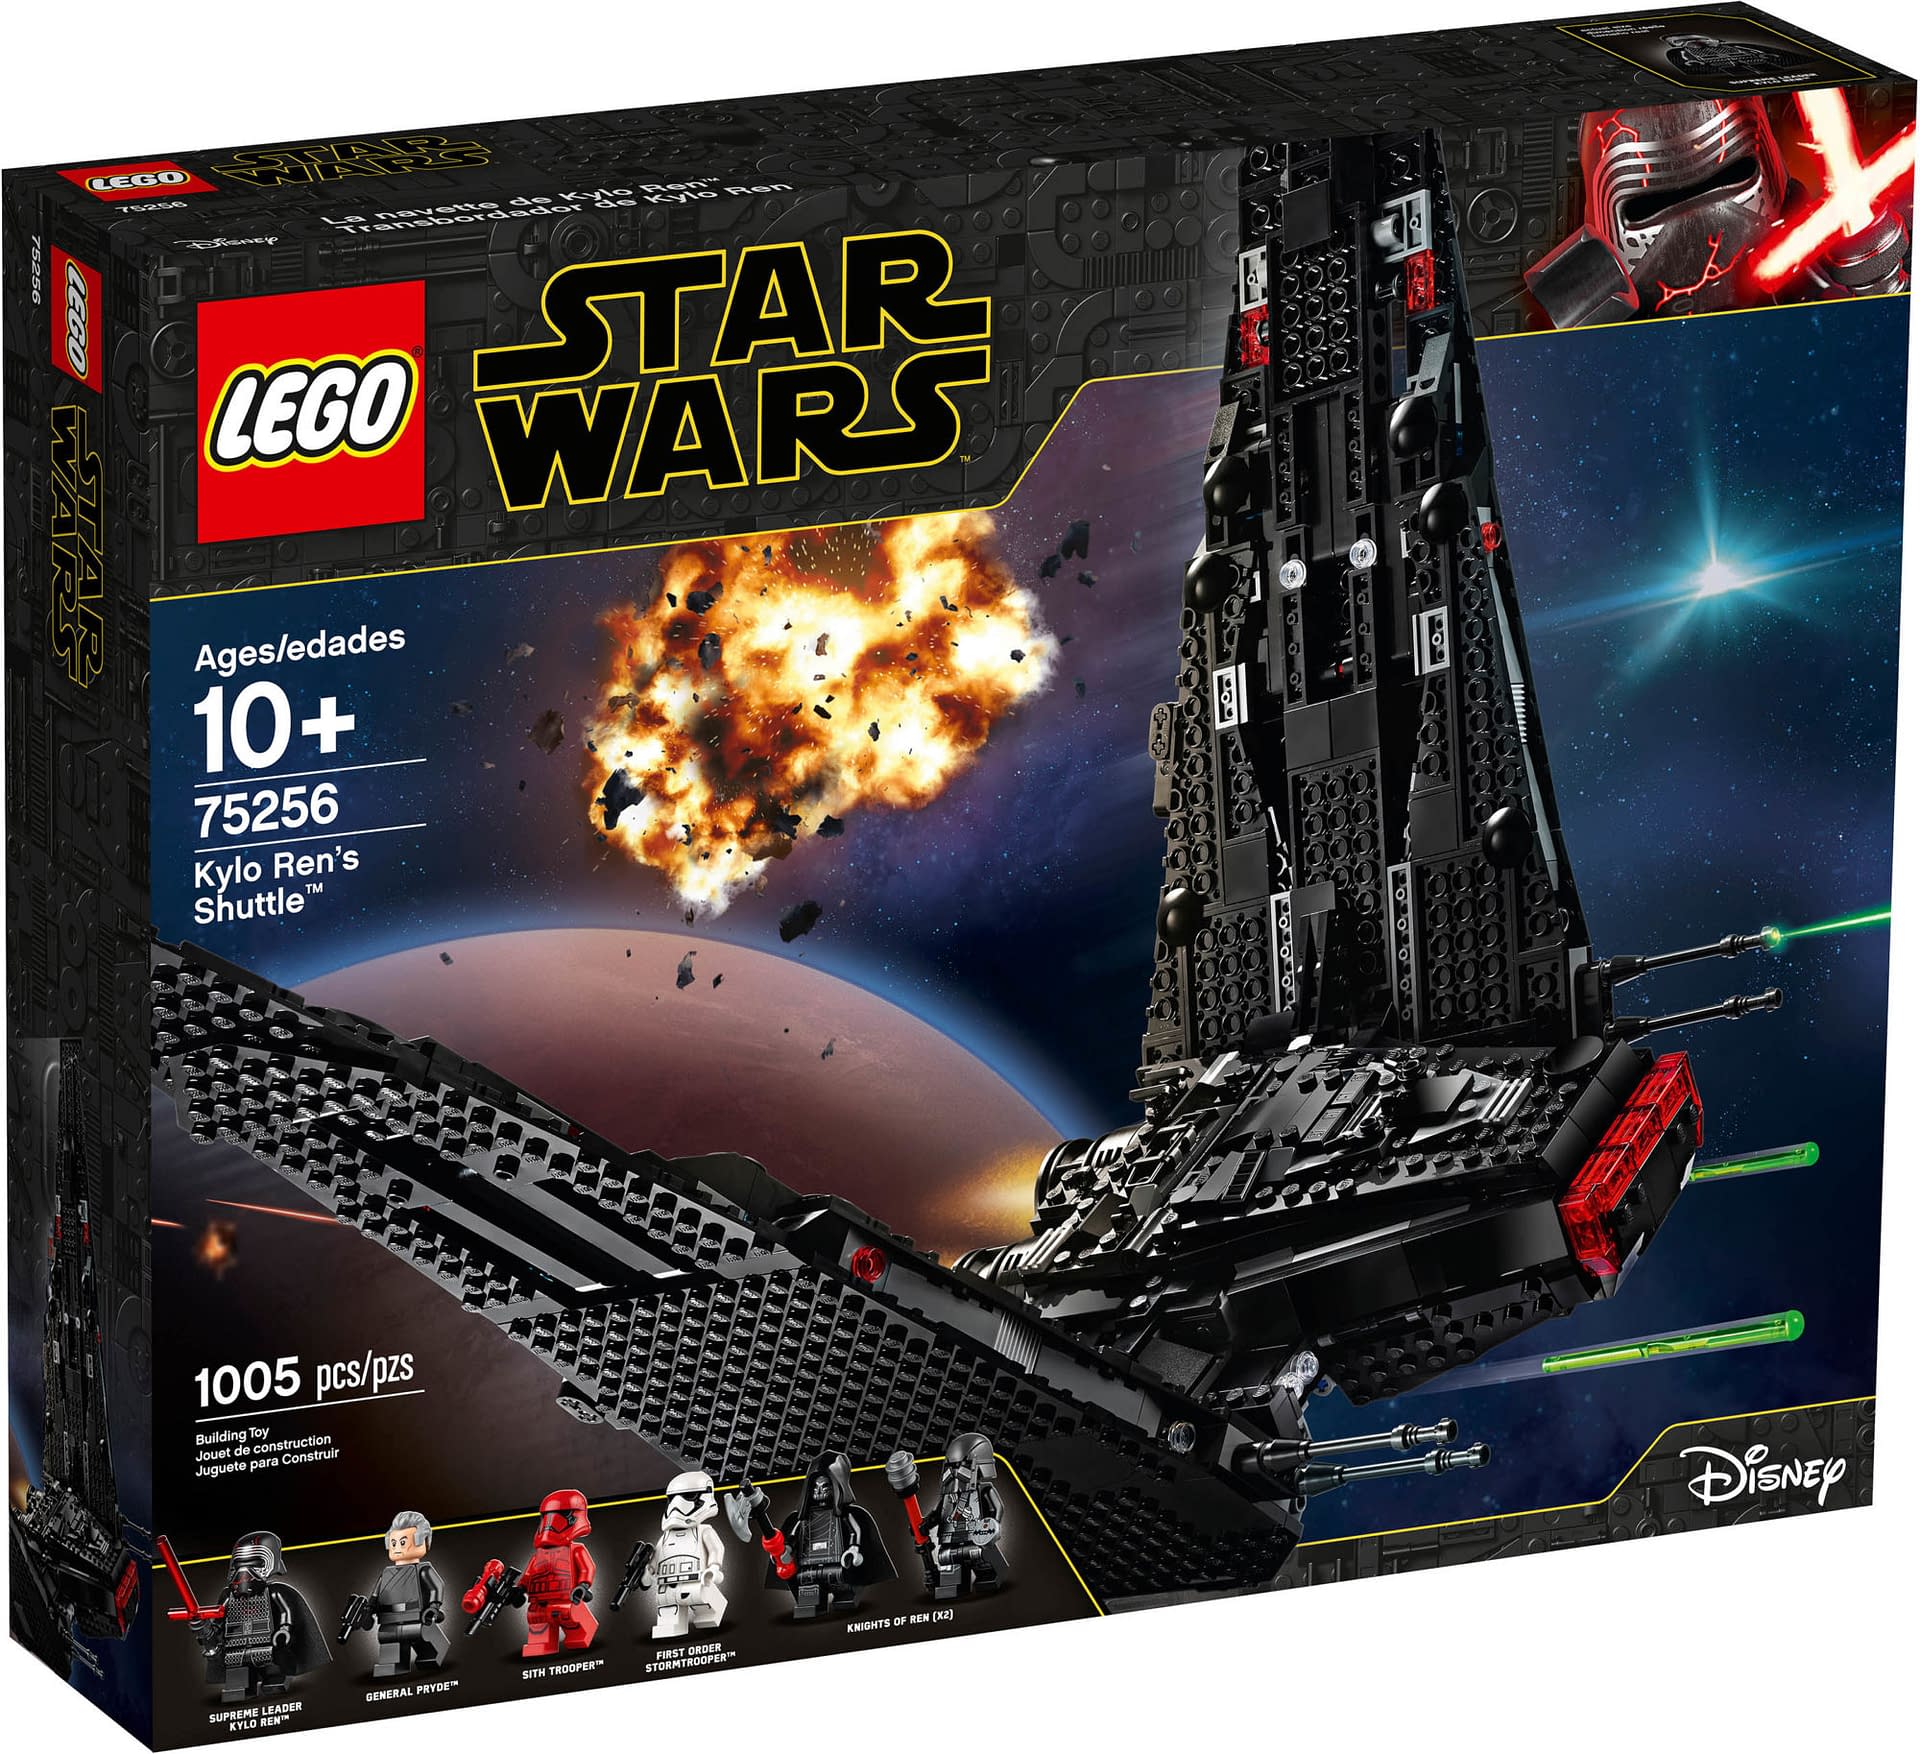 Star Wars Ships Get Their LEGO Debut for Triple Force Friday